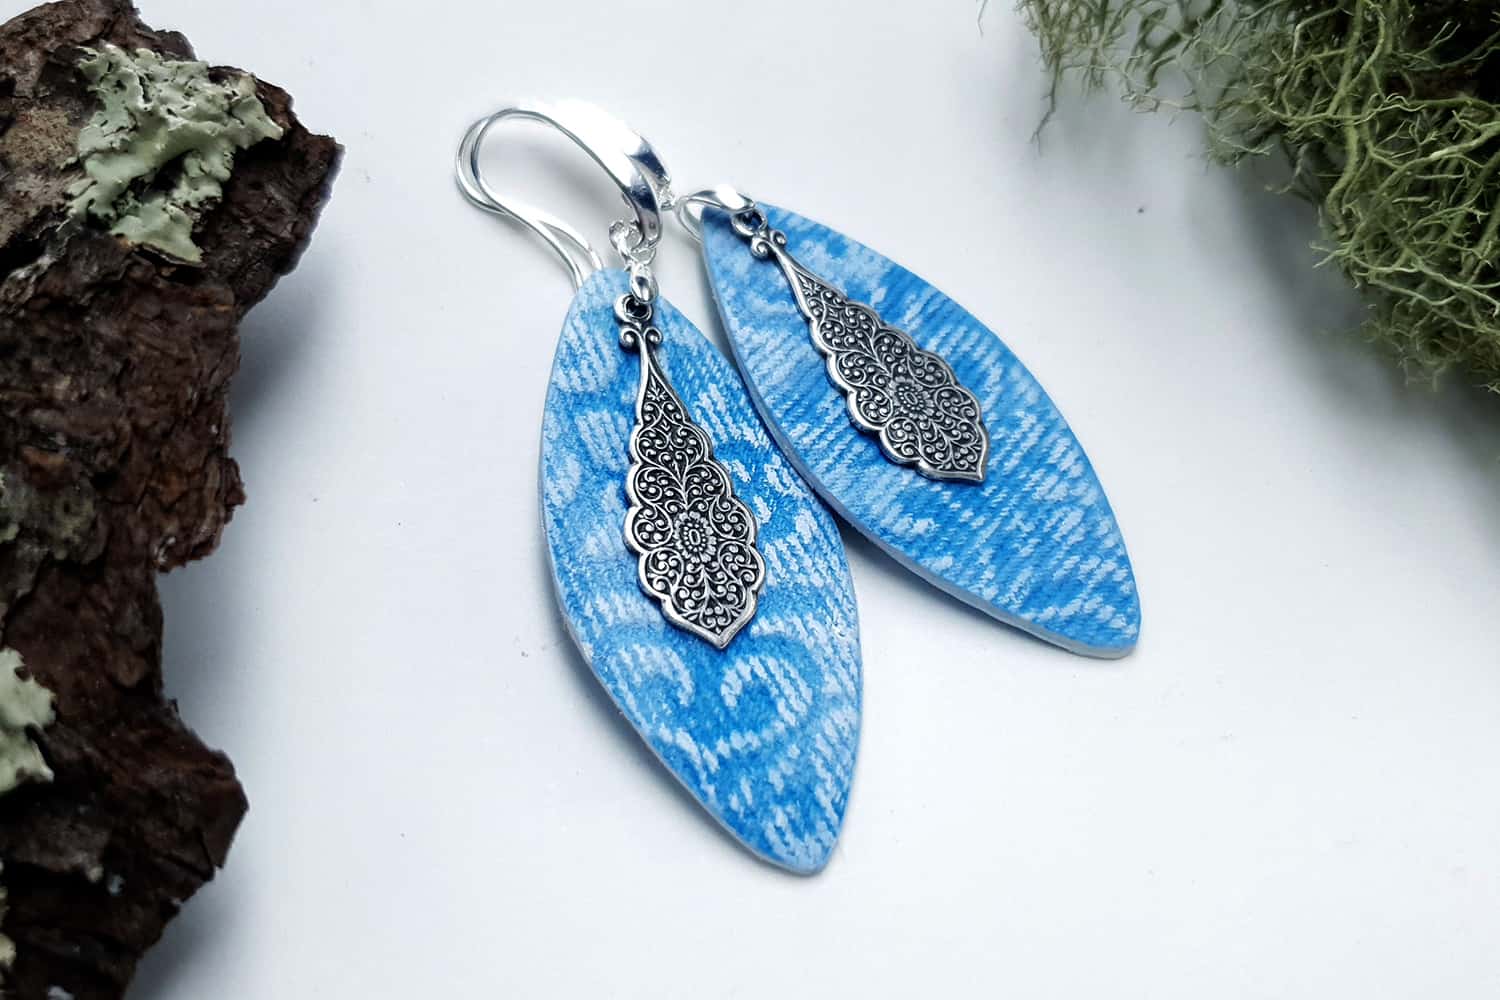 Jewelry from "Faux Jeans/Denim Fabric" course for your inspiration #13